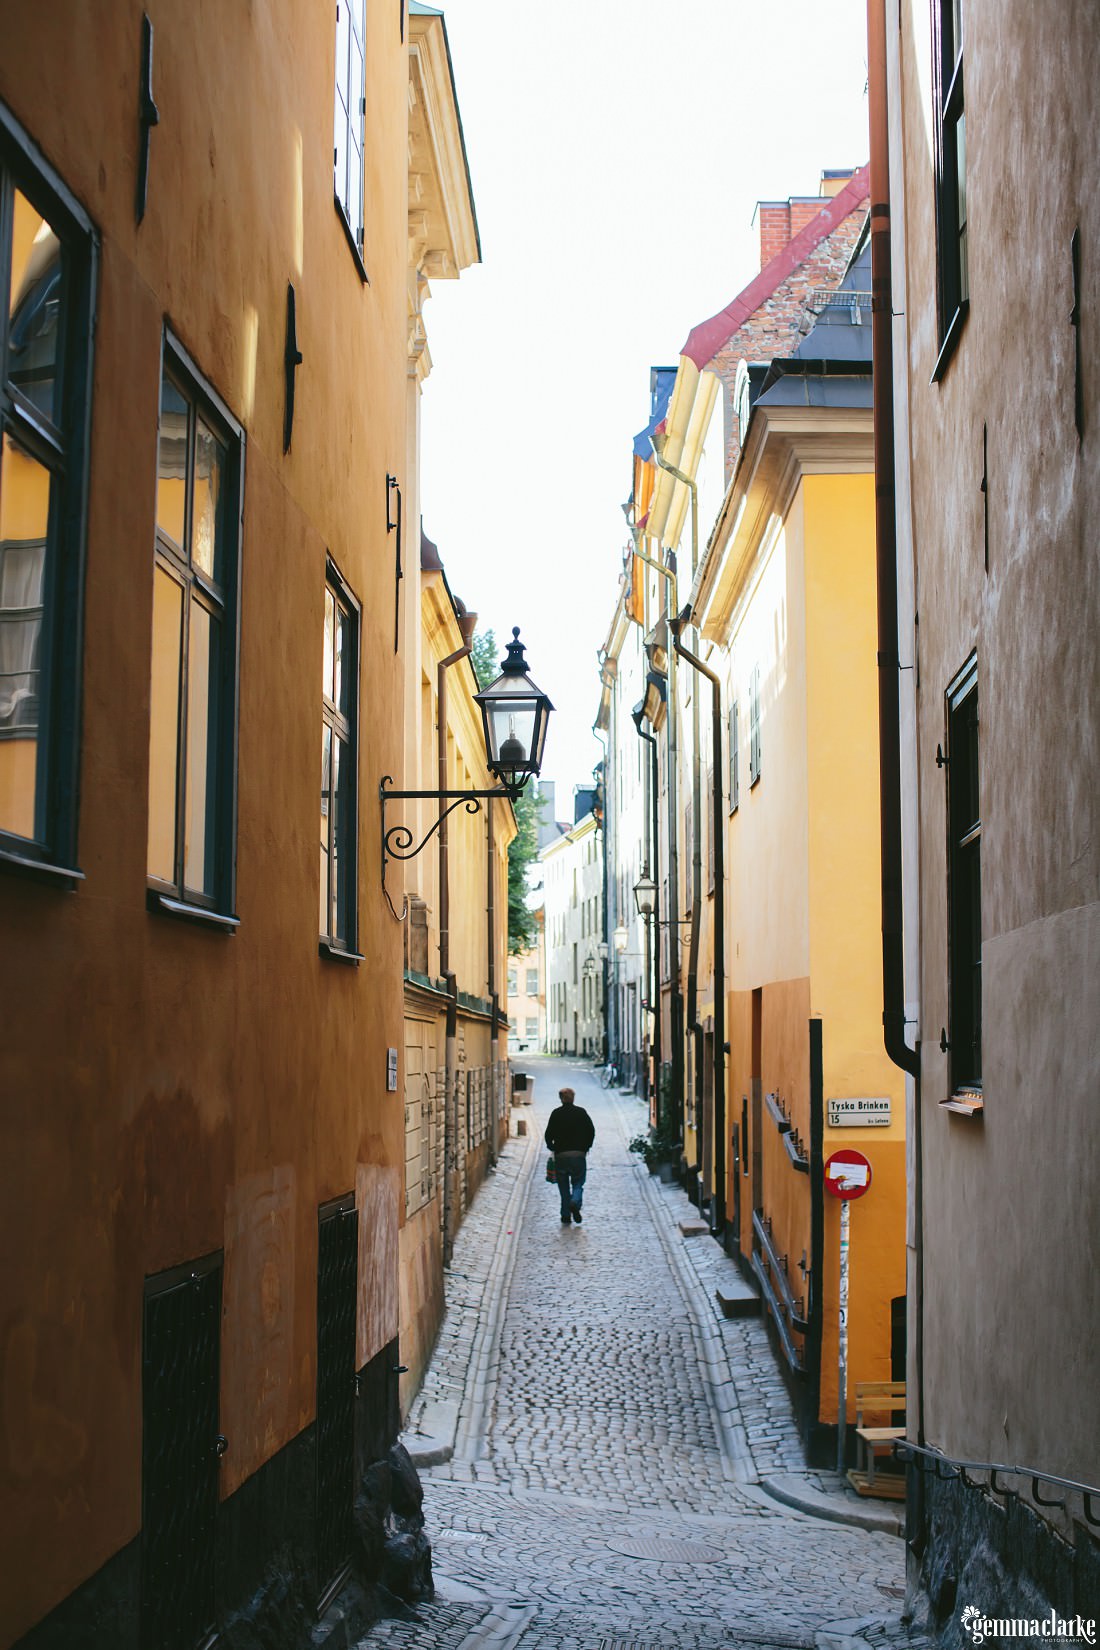 An early morning walk in an alley with golden buildings and cobblestone paths in Stockholm's Old Town, Gamla Stan